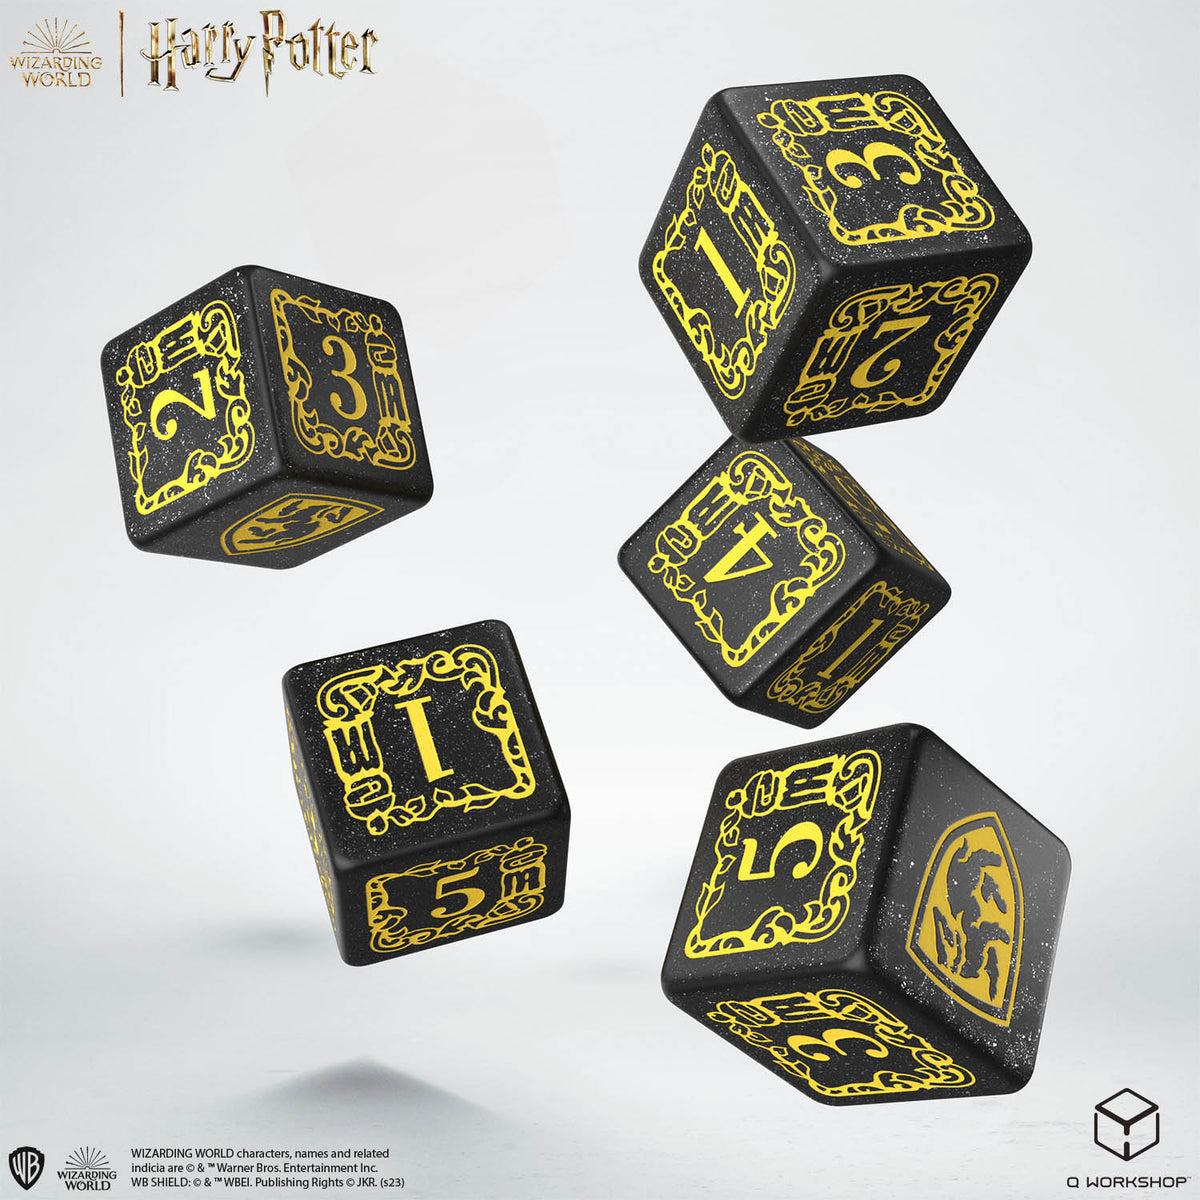 Q Workshop - Harry Potter Hufflepuff Dice and Pouch